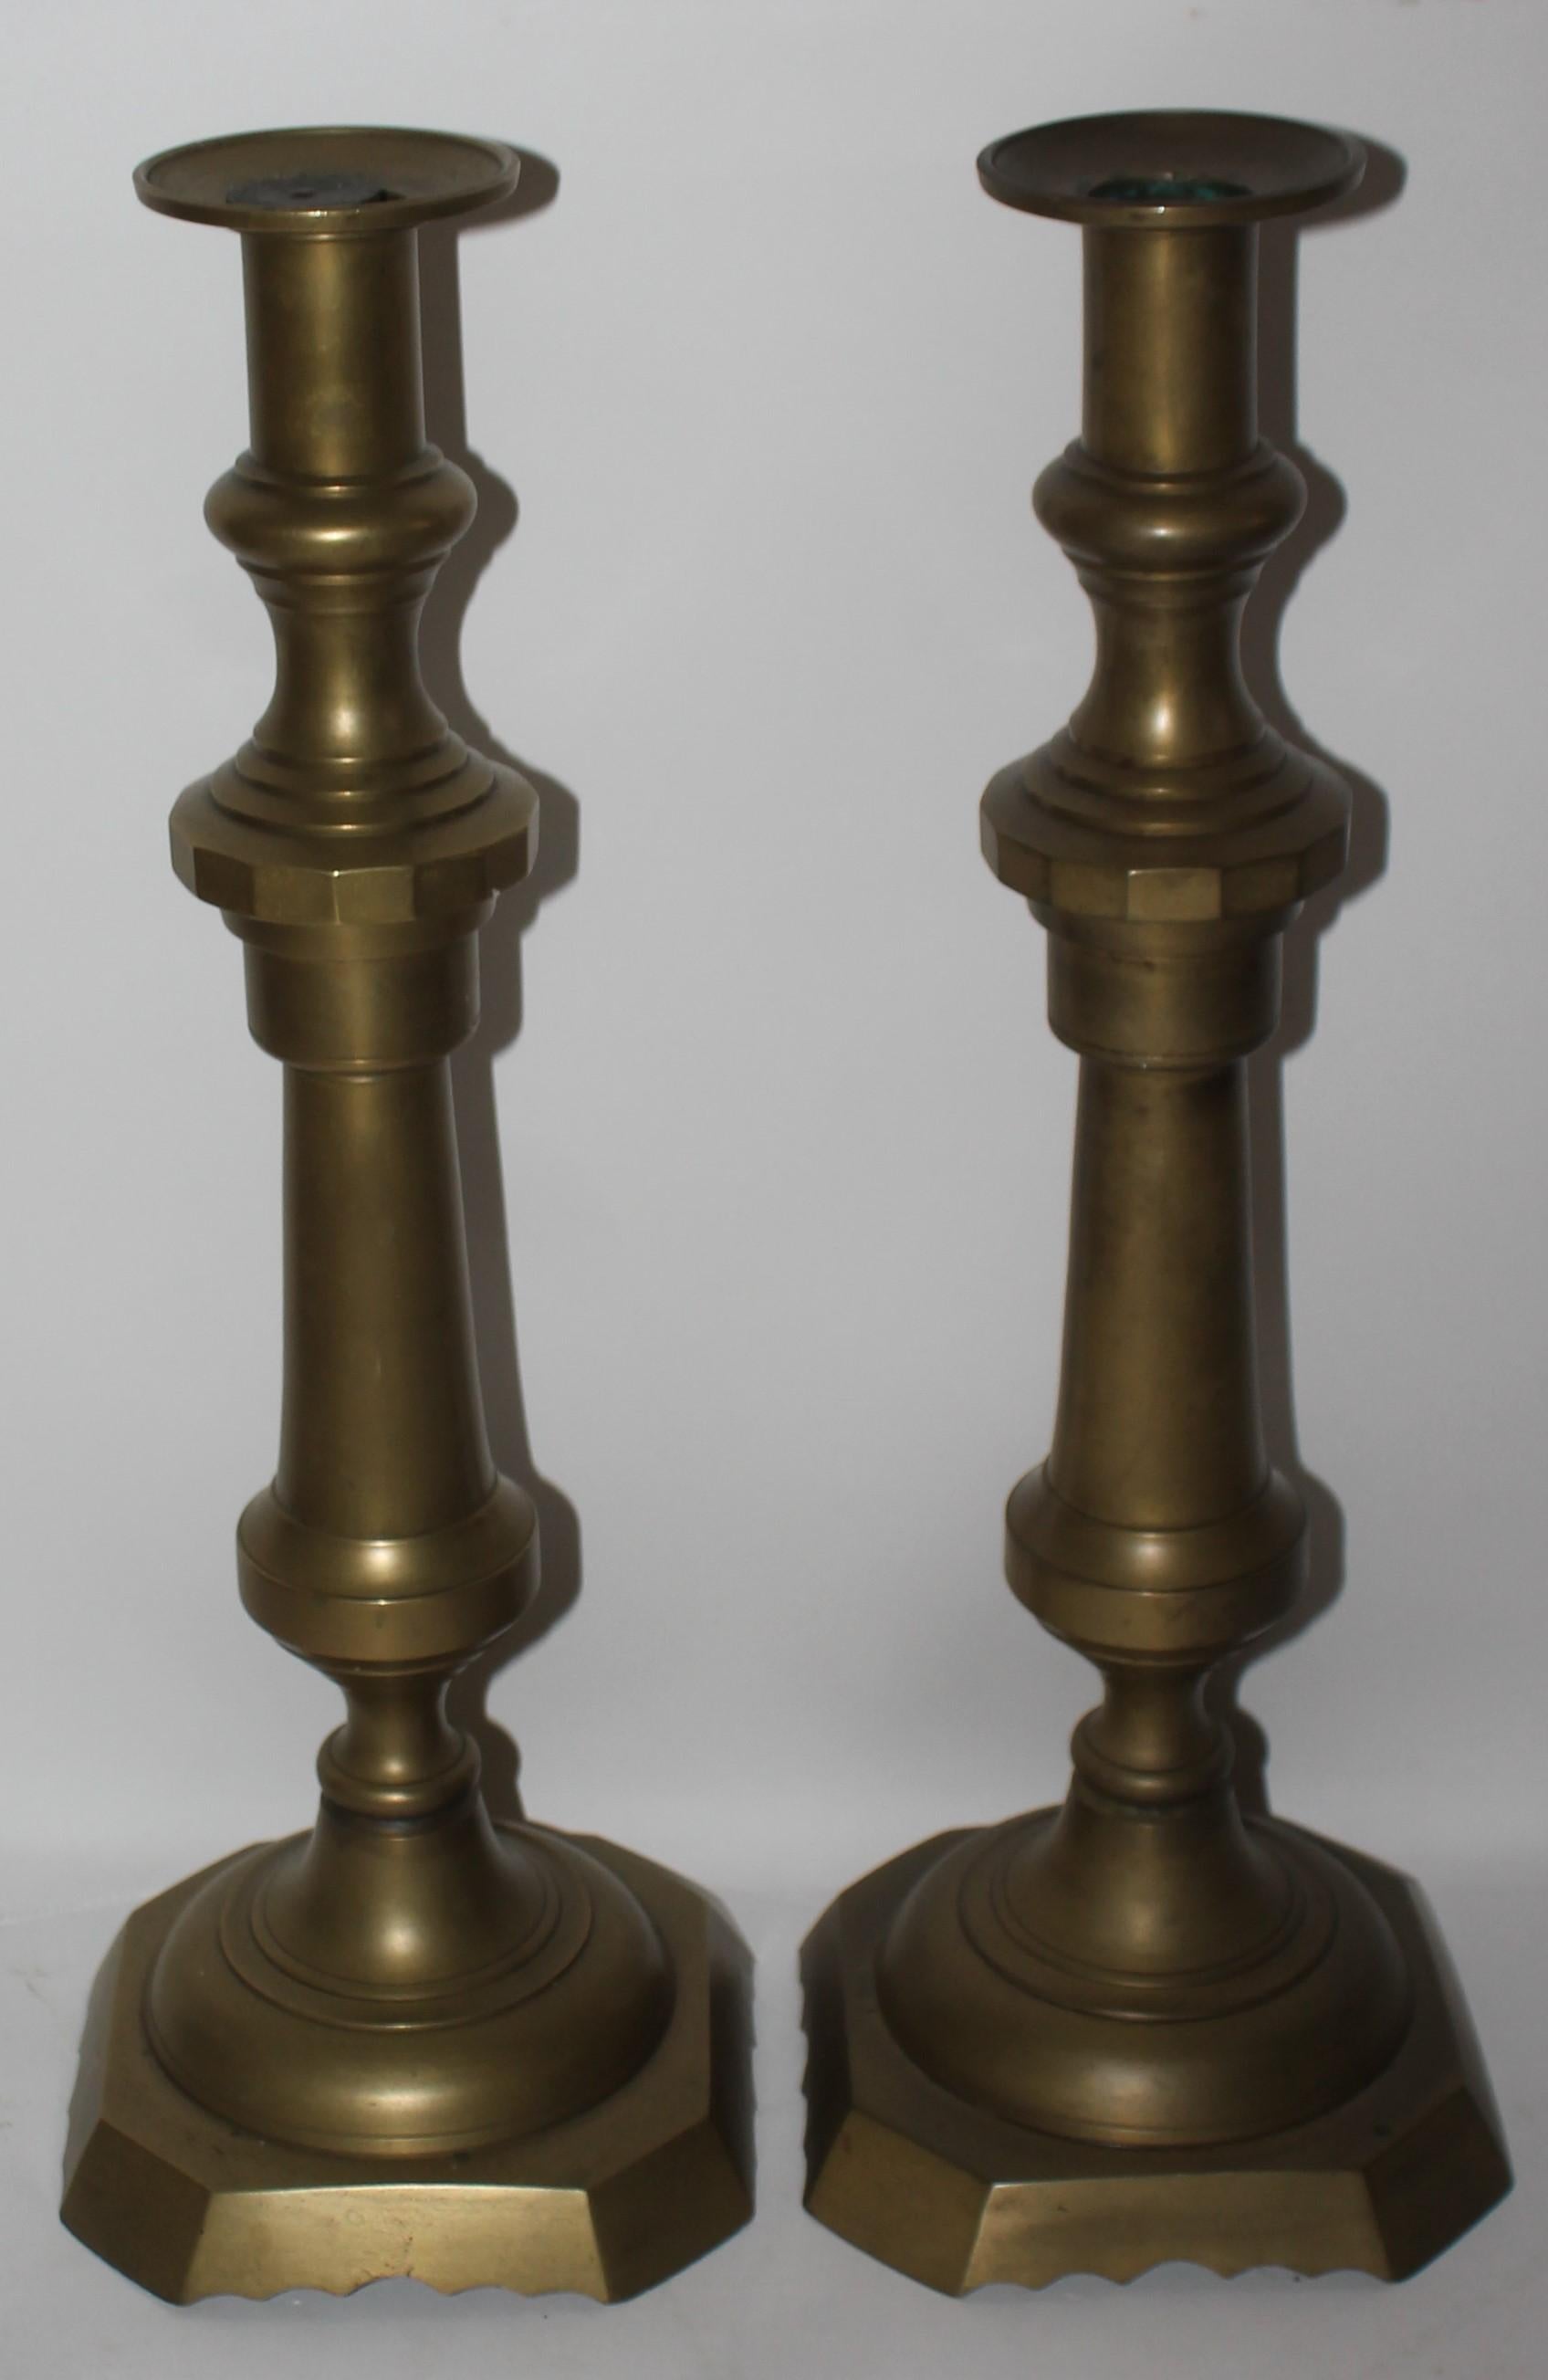 This fine large push up bottom early 19th century candleholders are in great as found condition. These are huge brass candlestick holders.